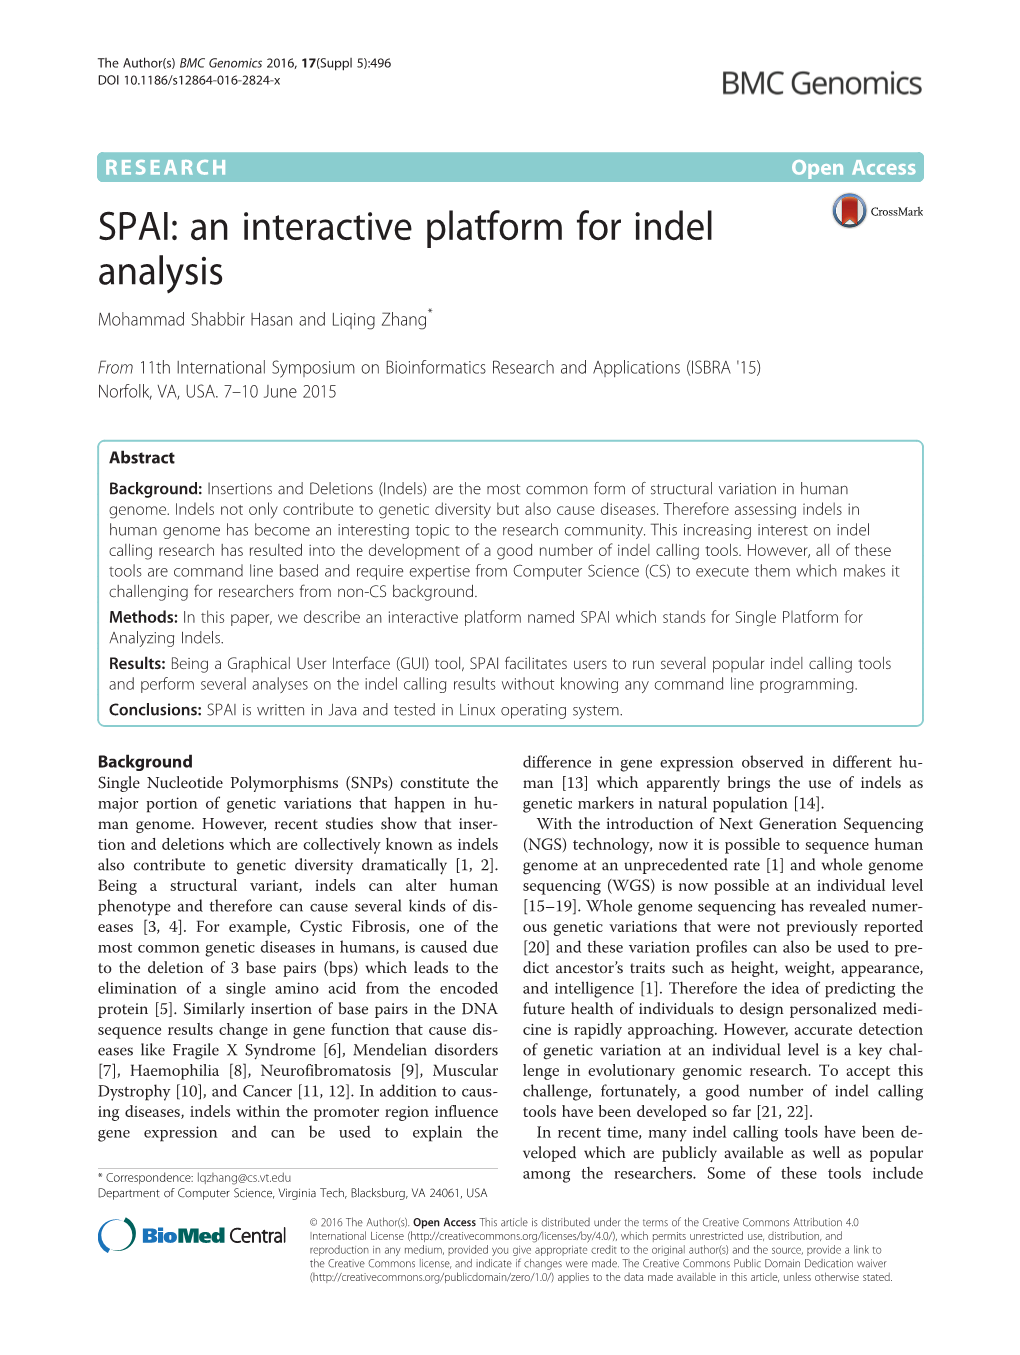 SPAI: an Interactive Platform for Indel Analysis Mohammad Shabbir Hasan and Liqing Zhang*